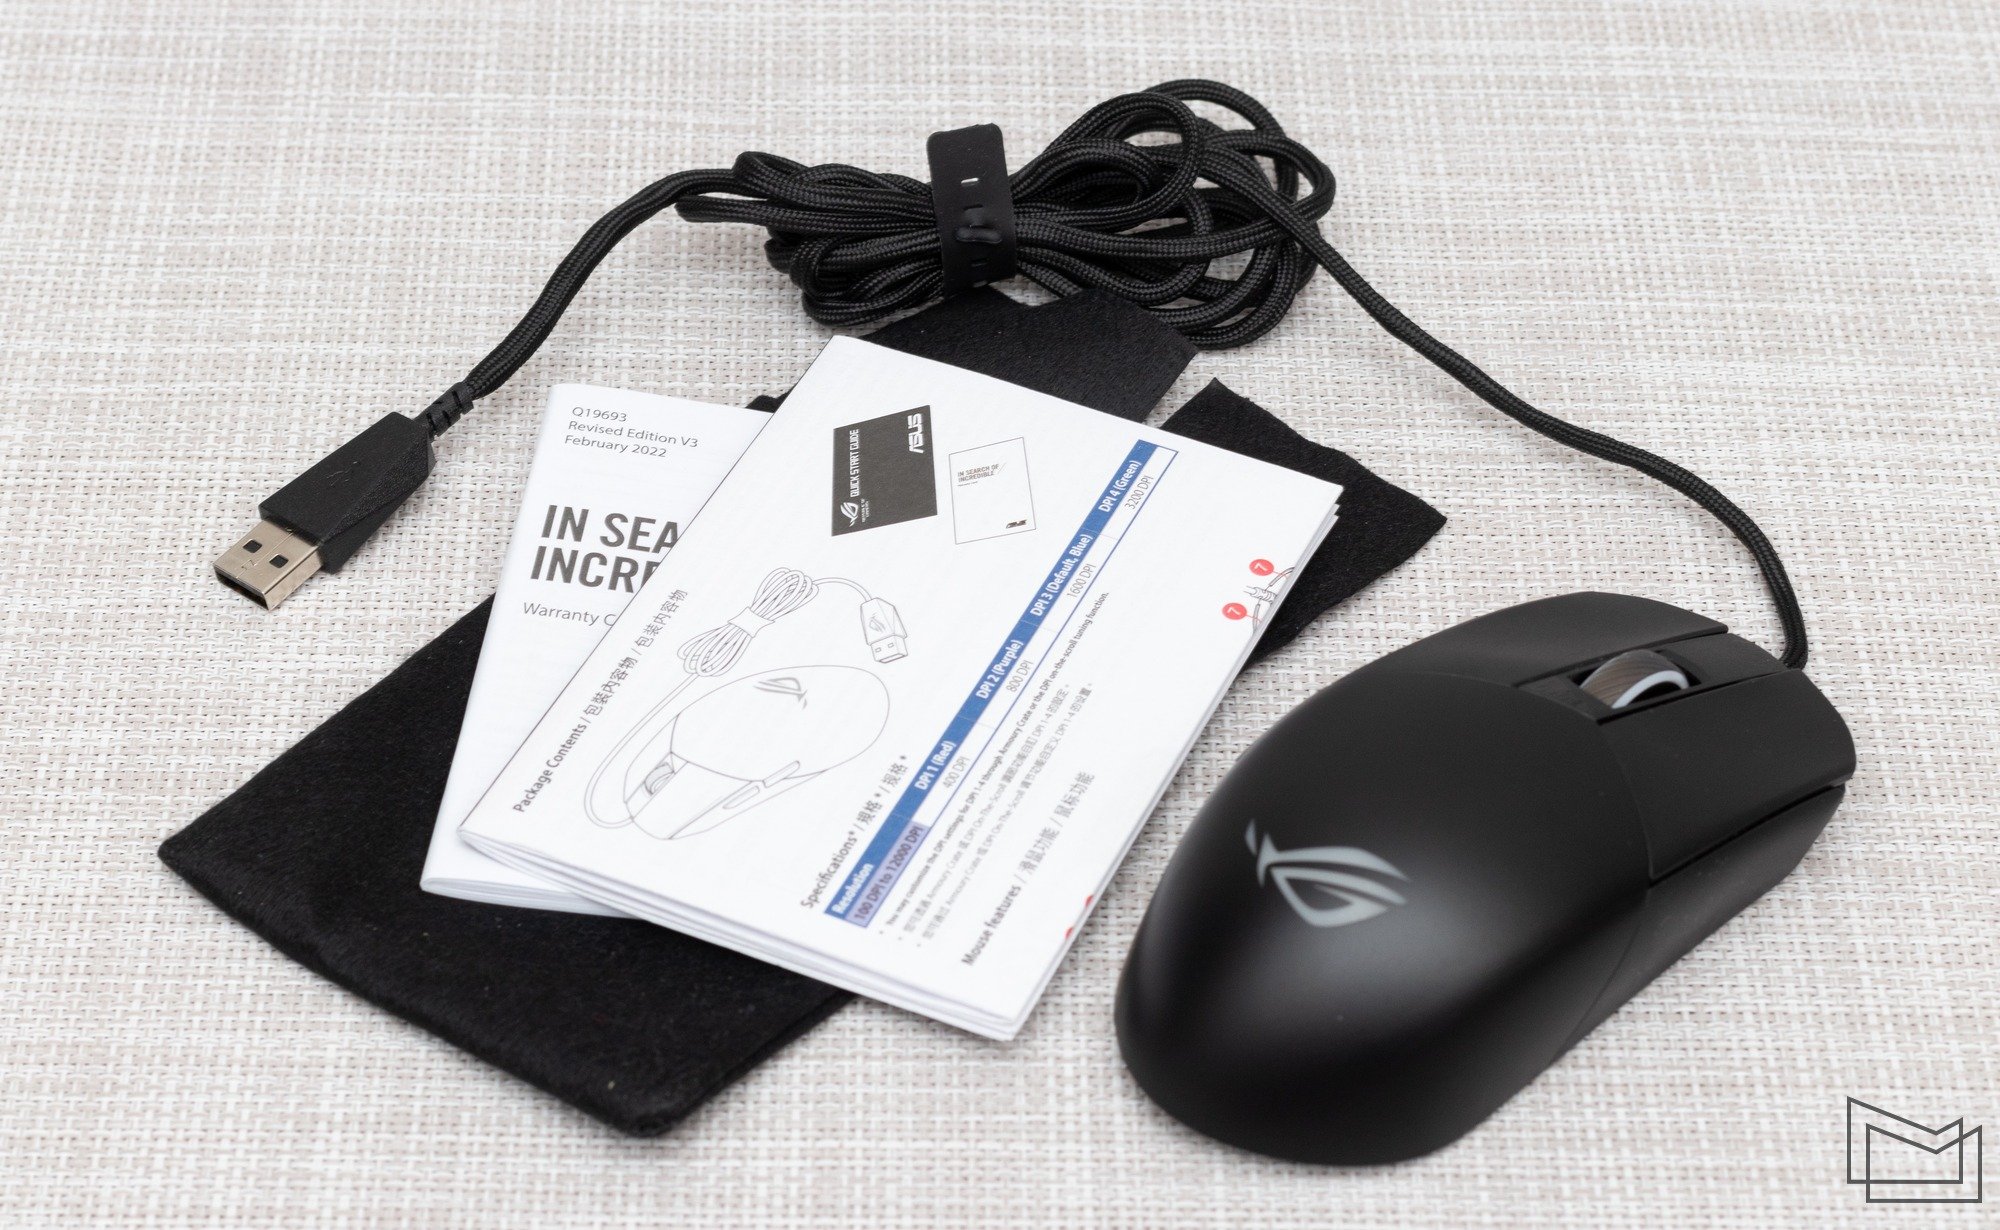 New ASUS Strix impact 3 wireless is now mid-hump mouse while wired